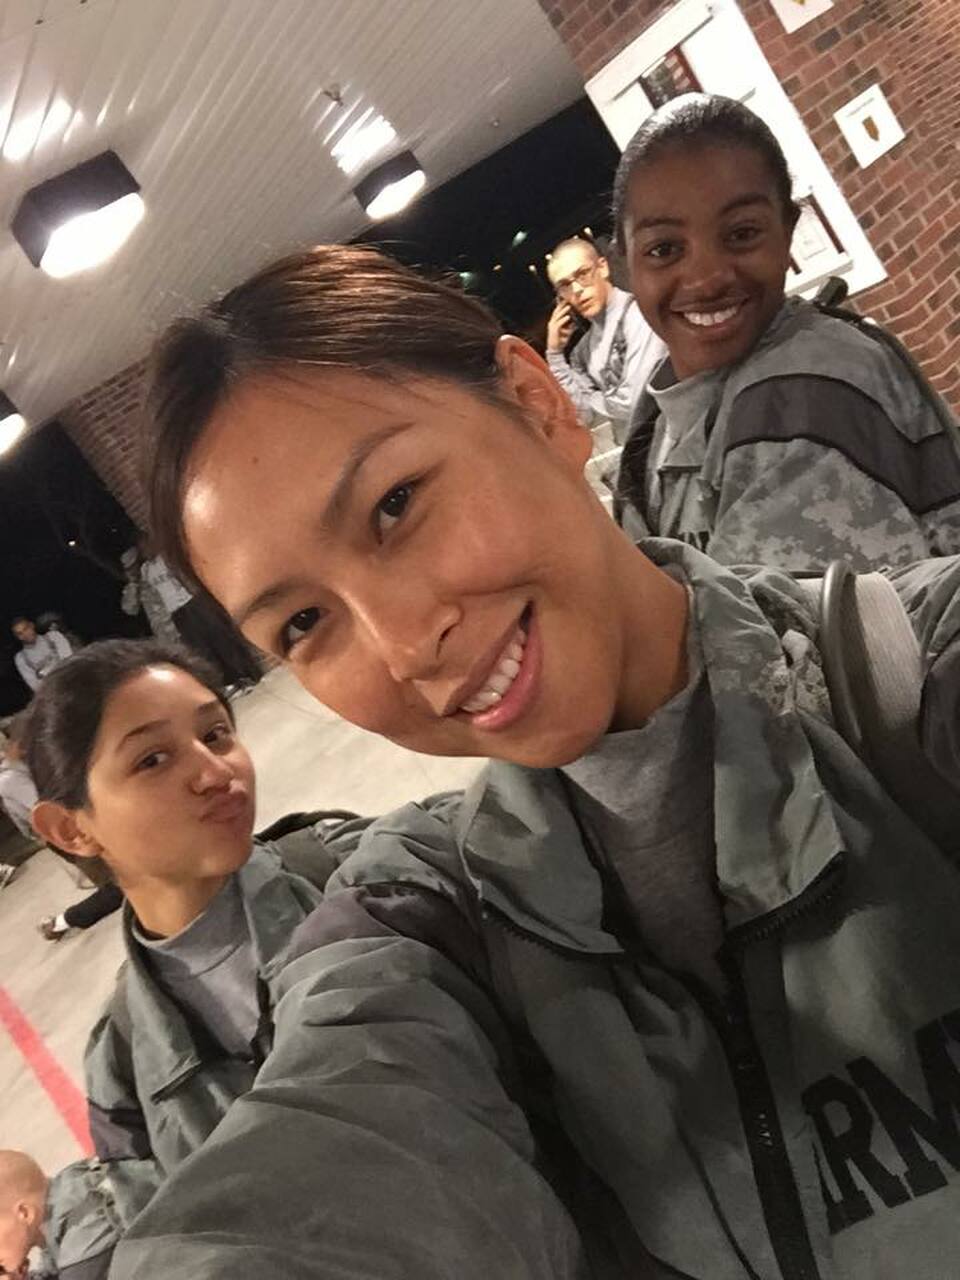 US Army Specialist Kristania Virginia Besouw, right, enlisted last October after studying nursing in Kansas. (Photo courtesy of Facebook)